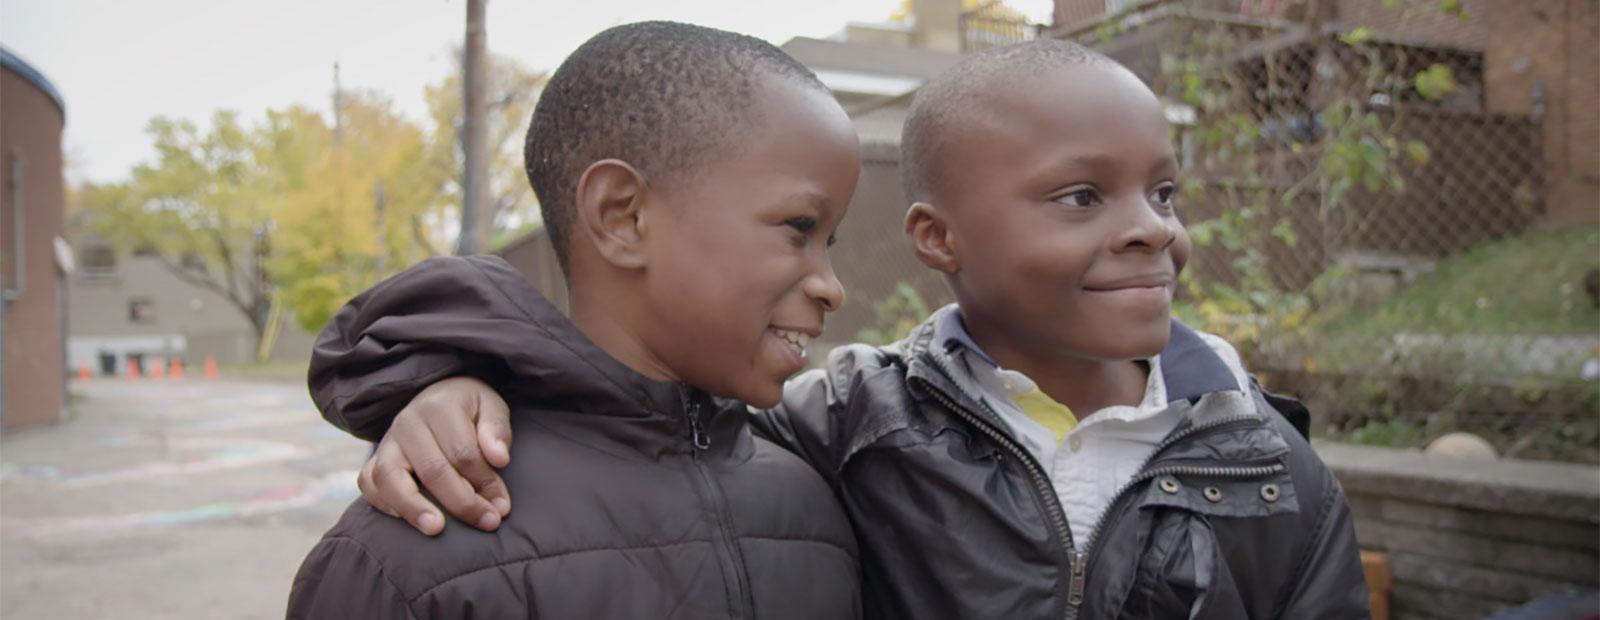 Screen image of two children from the film Unspoken Tears.